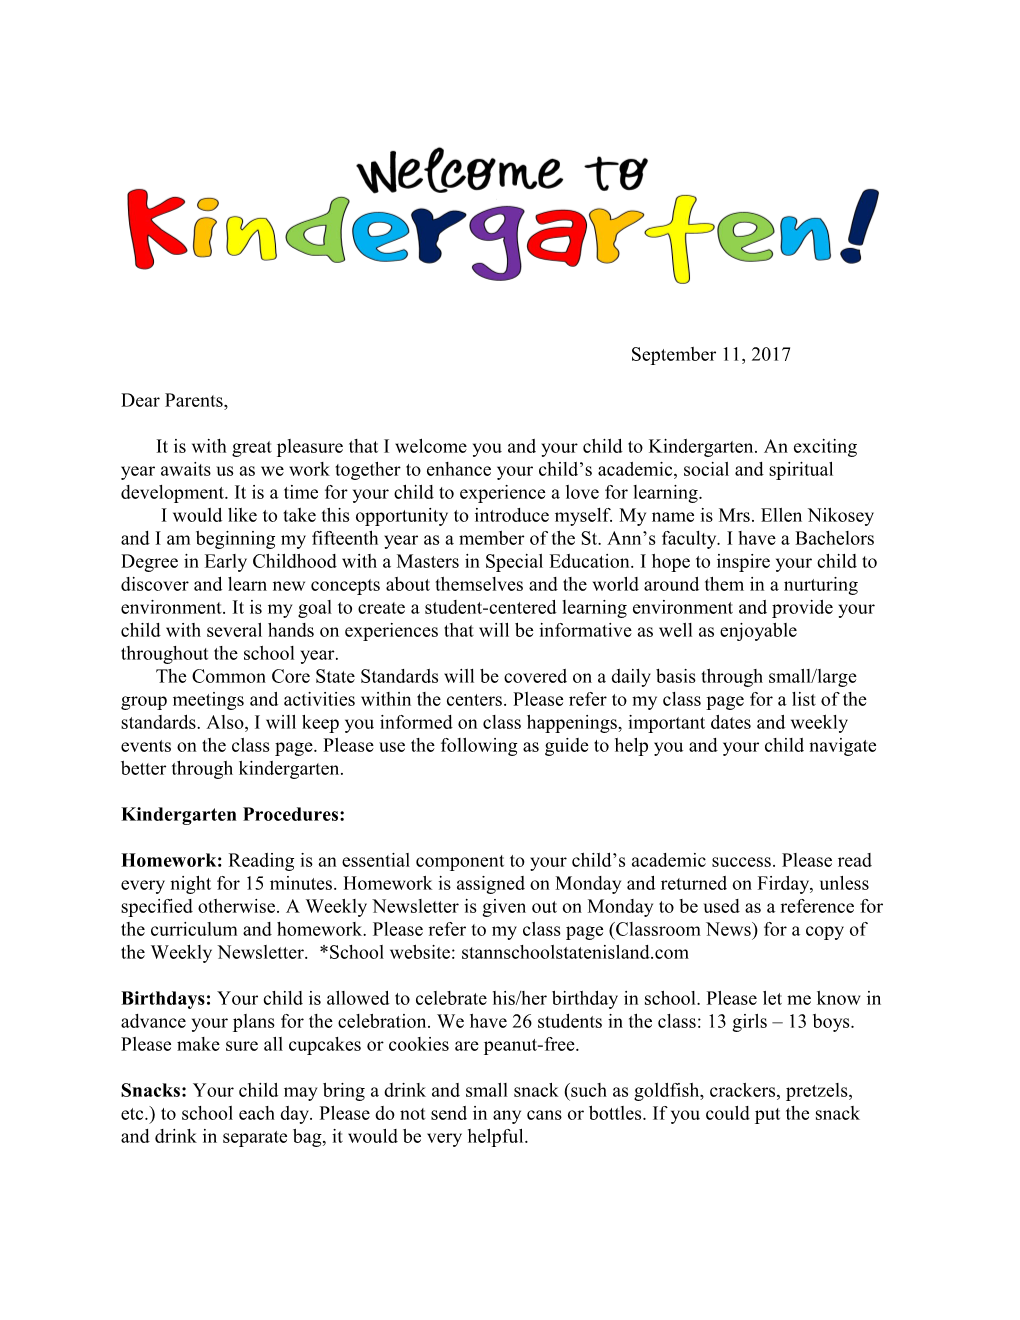 It Is with Great Pleasure That I Welcome You and Your Child to Kindergarten. an Exciting